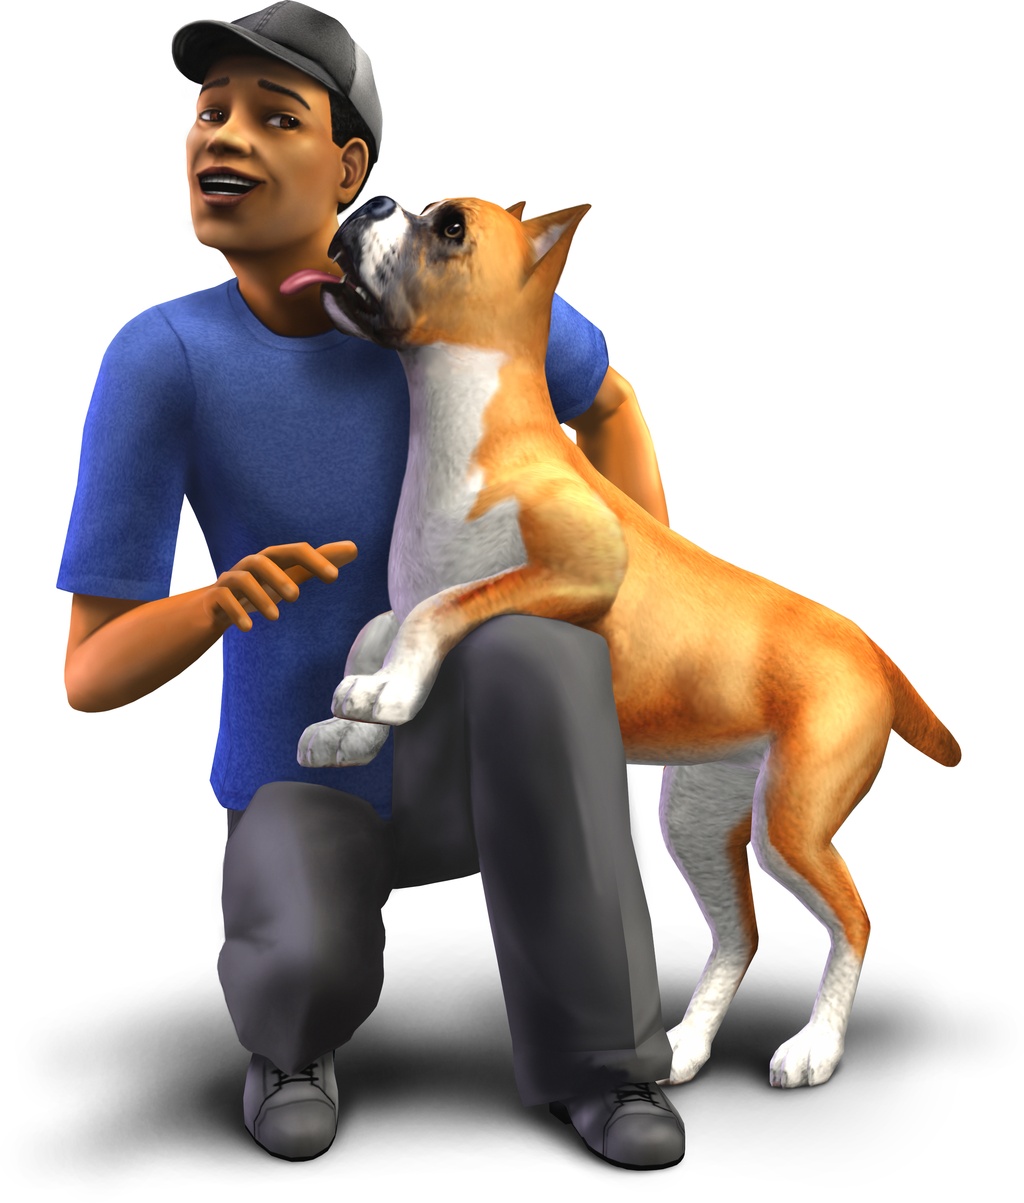 Your little computer people will go to the dogs in the next Sims 2 game.